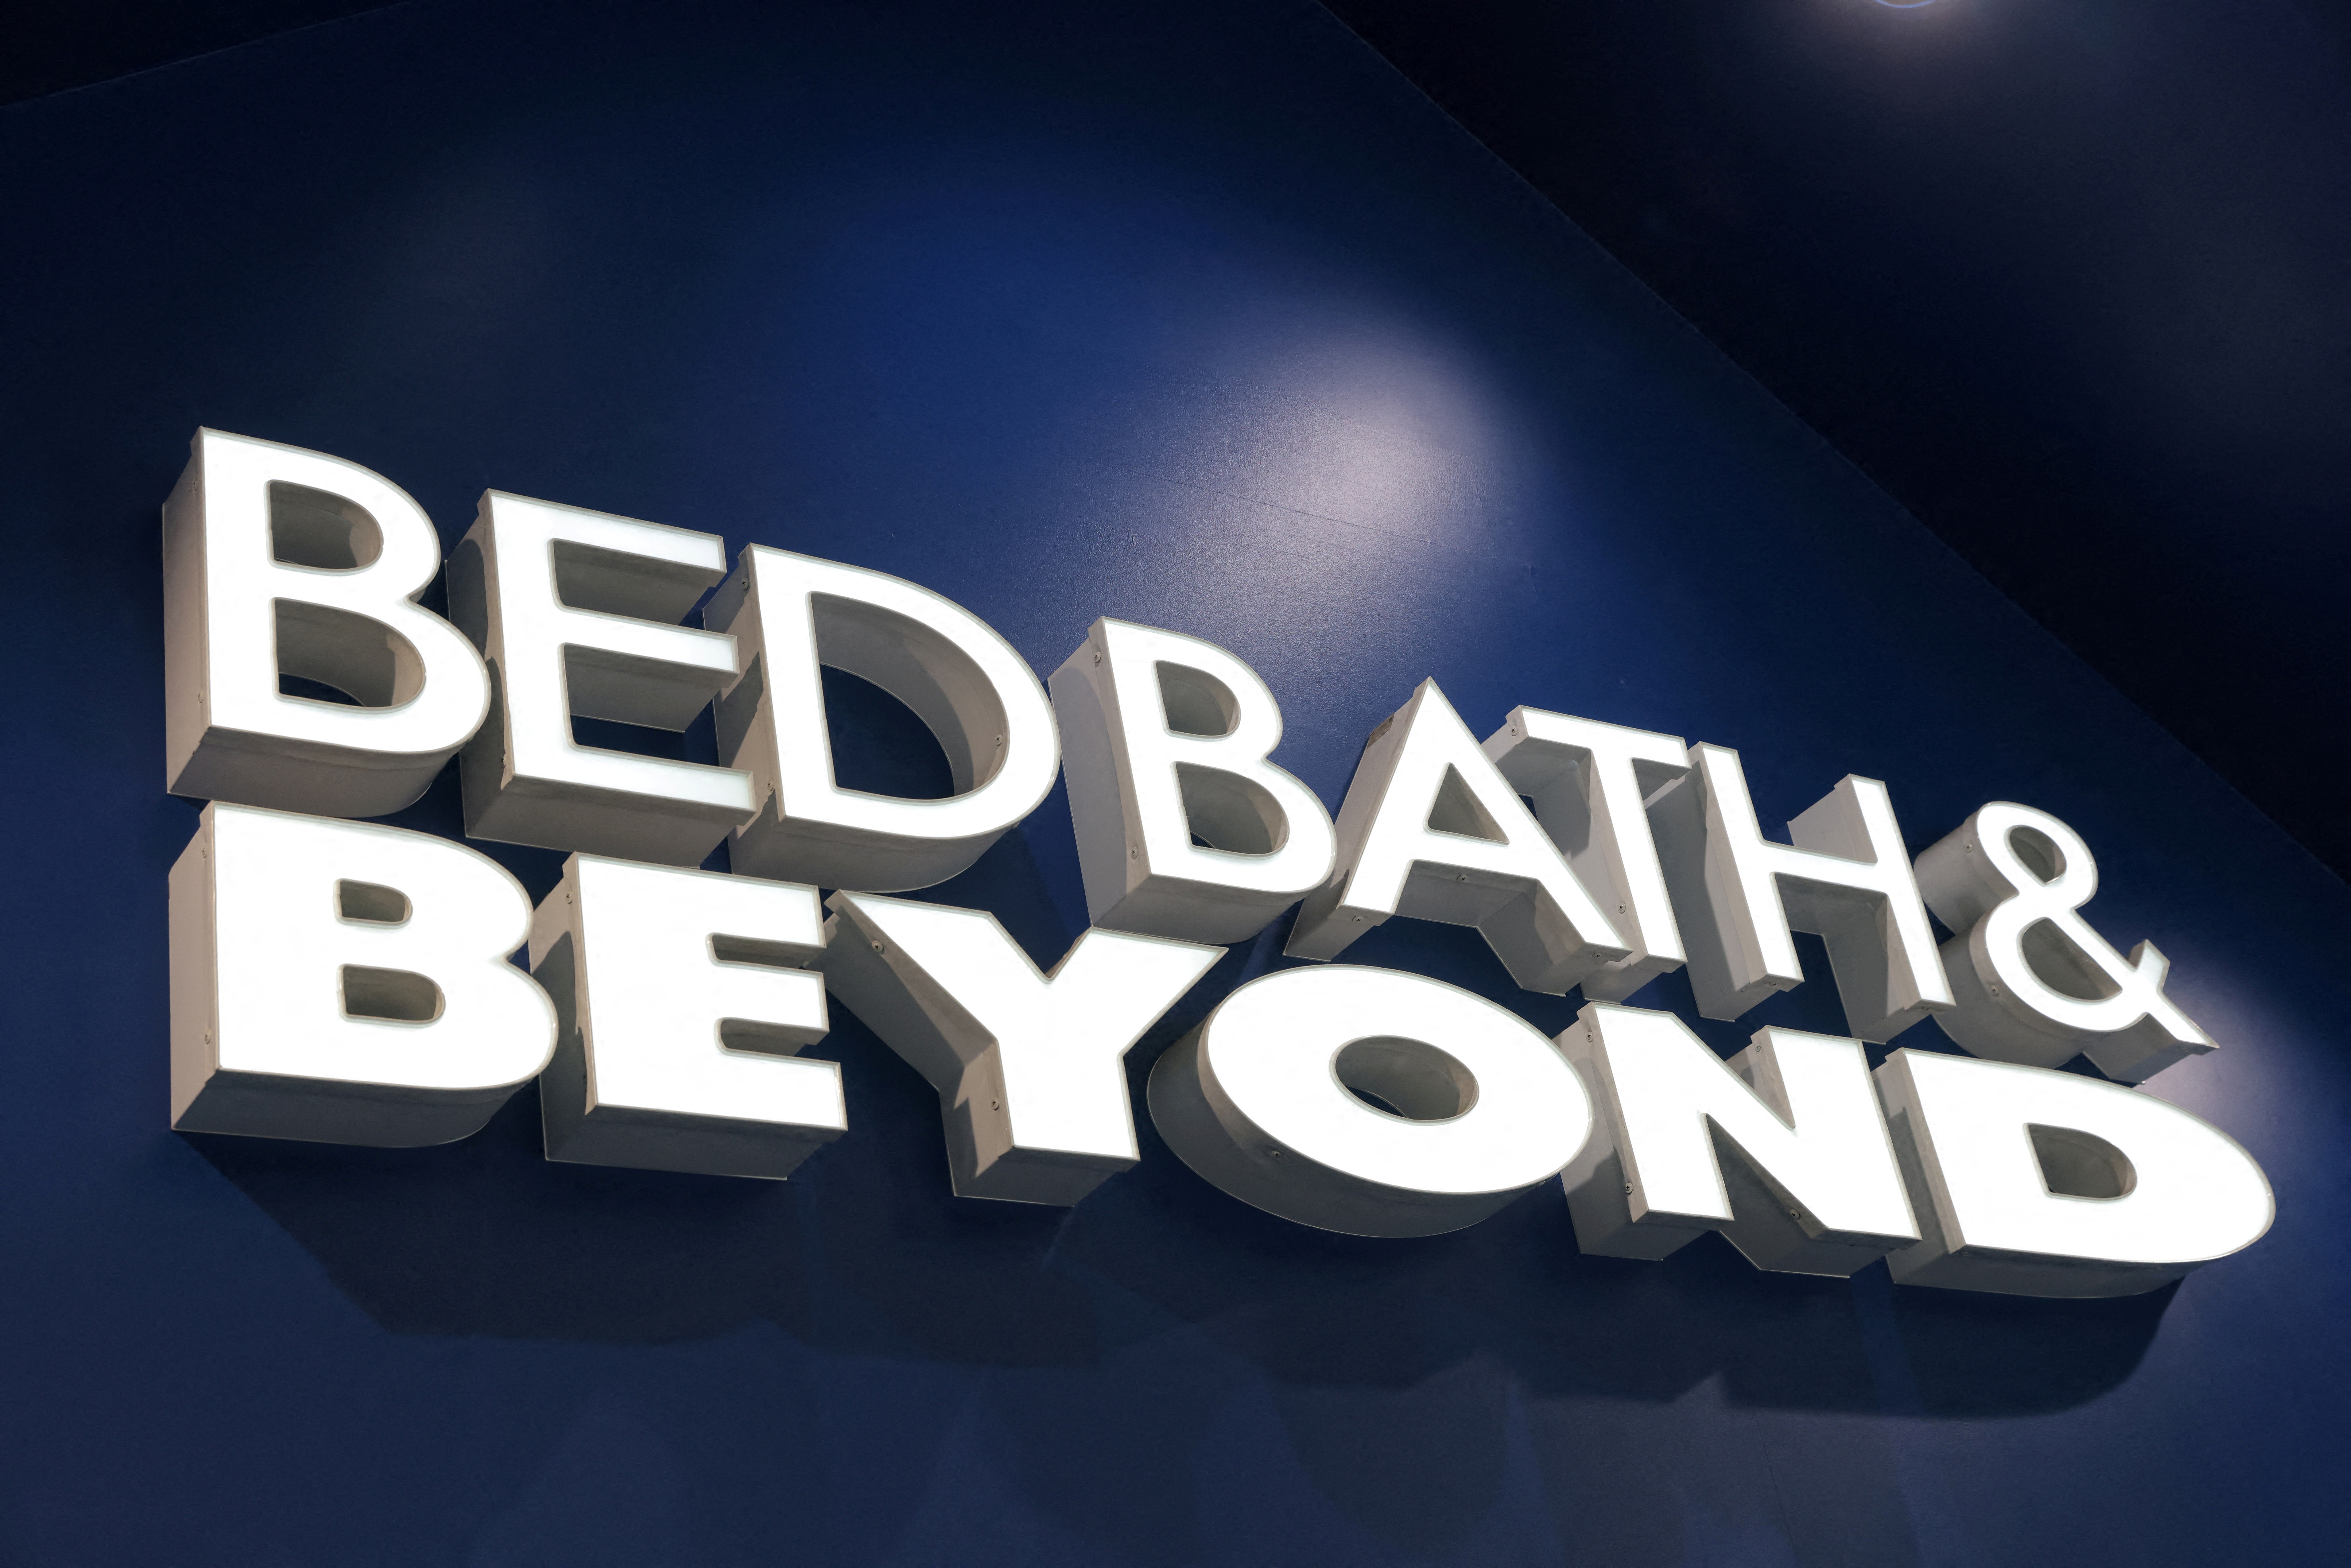 Signs are seen at a Bed Bath & Beyond store in Manhattan, New York